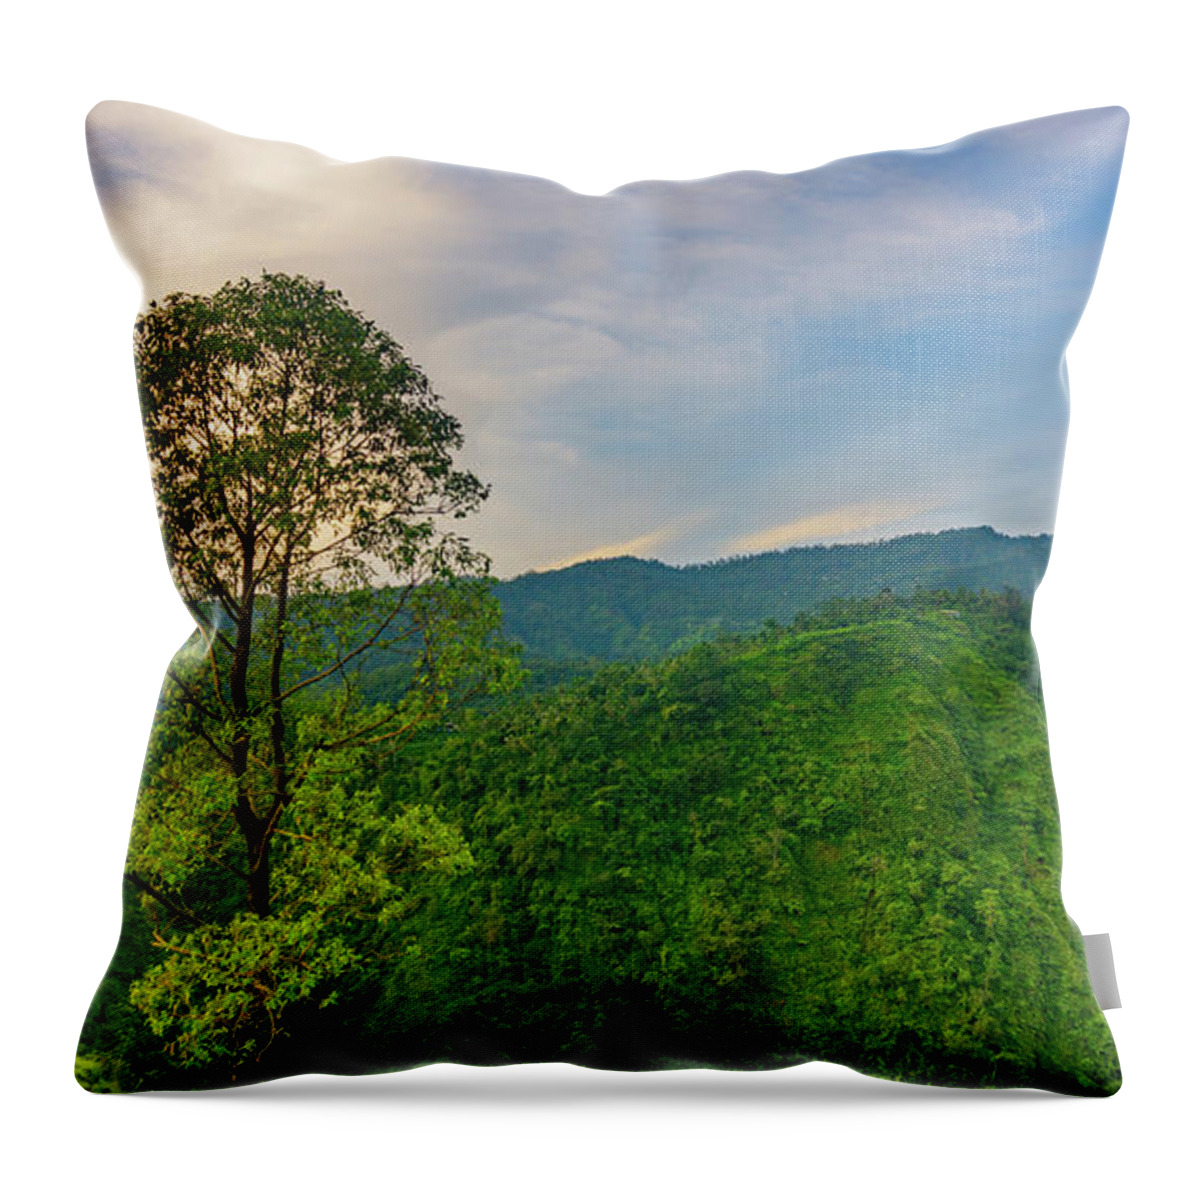 Hill Throw Pillow featuring the photograph View From The Hill by Ngurah Agus